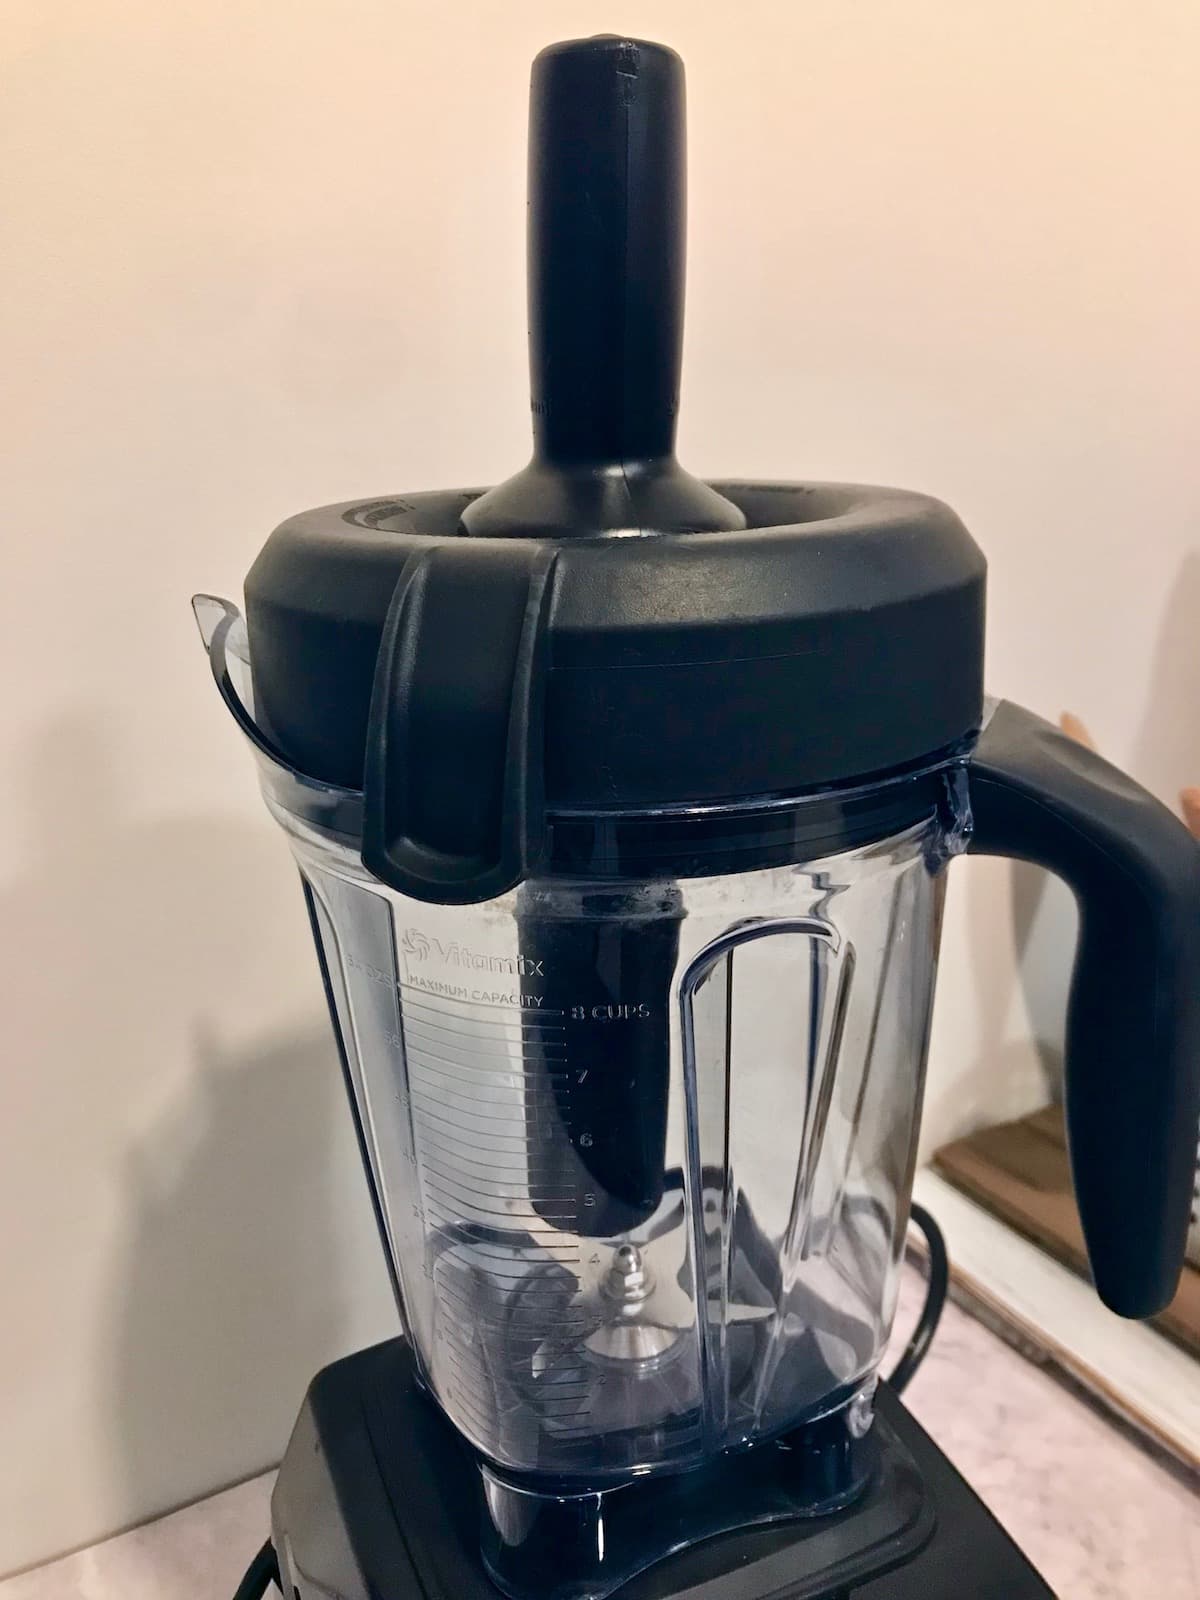 A Vitamix blender with a tamper in it.